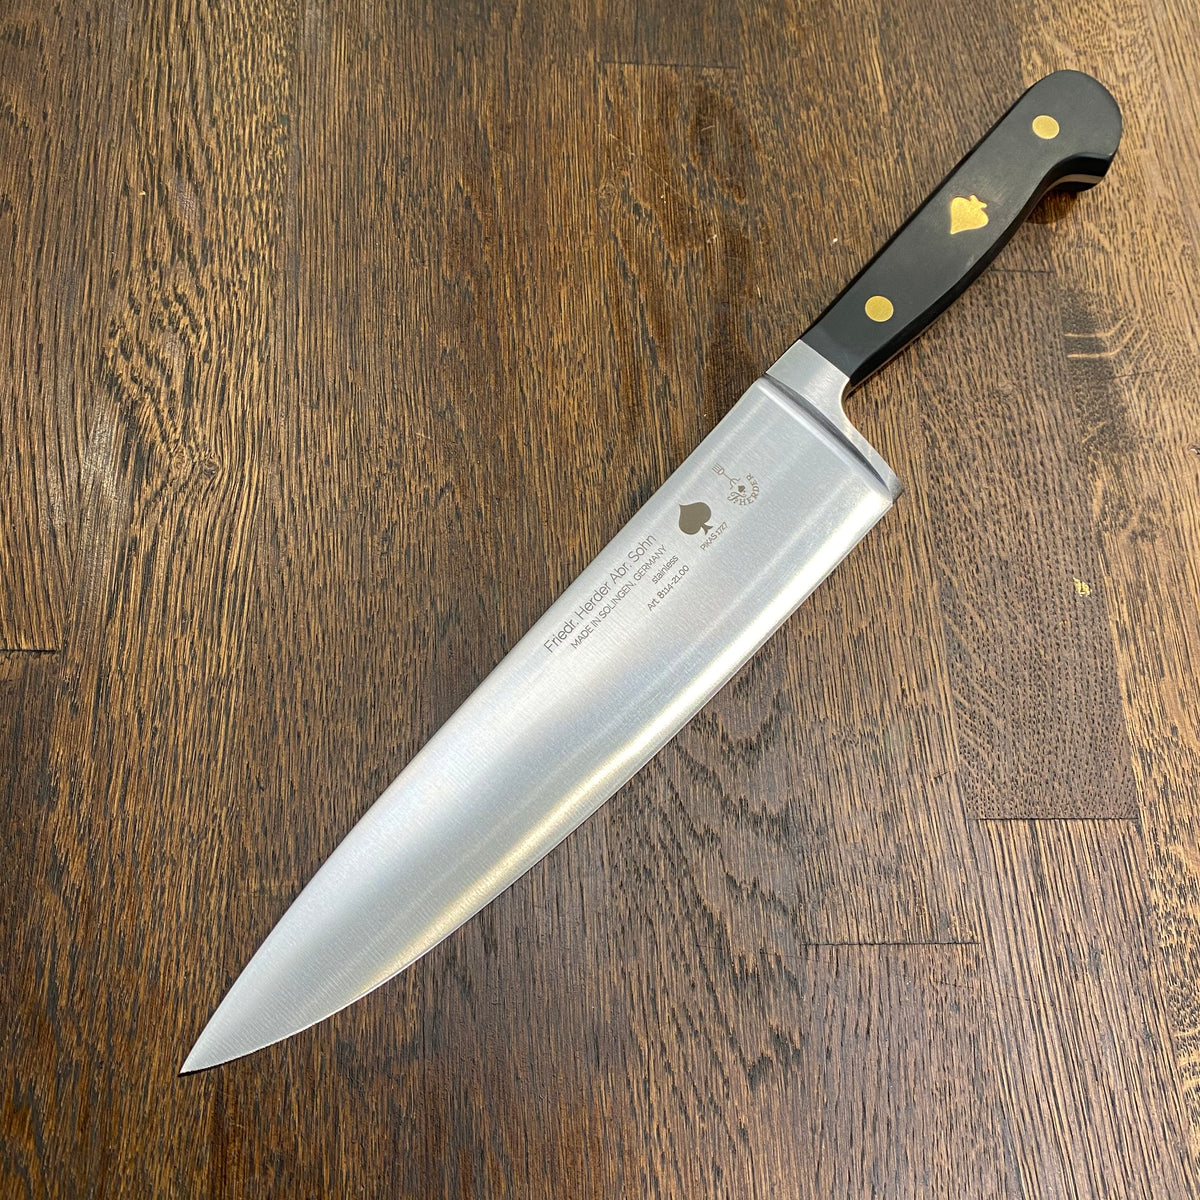 Friedr Herder 8” Chef Knife Forged Stainless POM